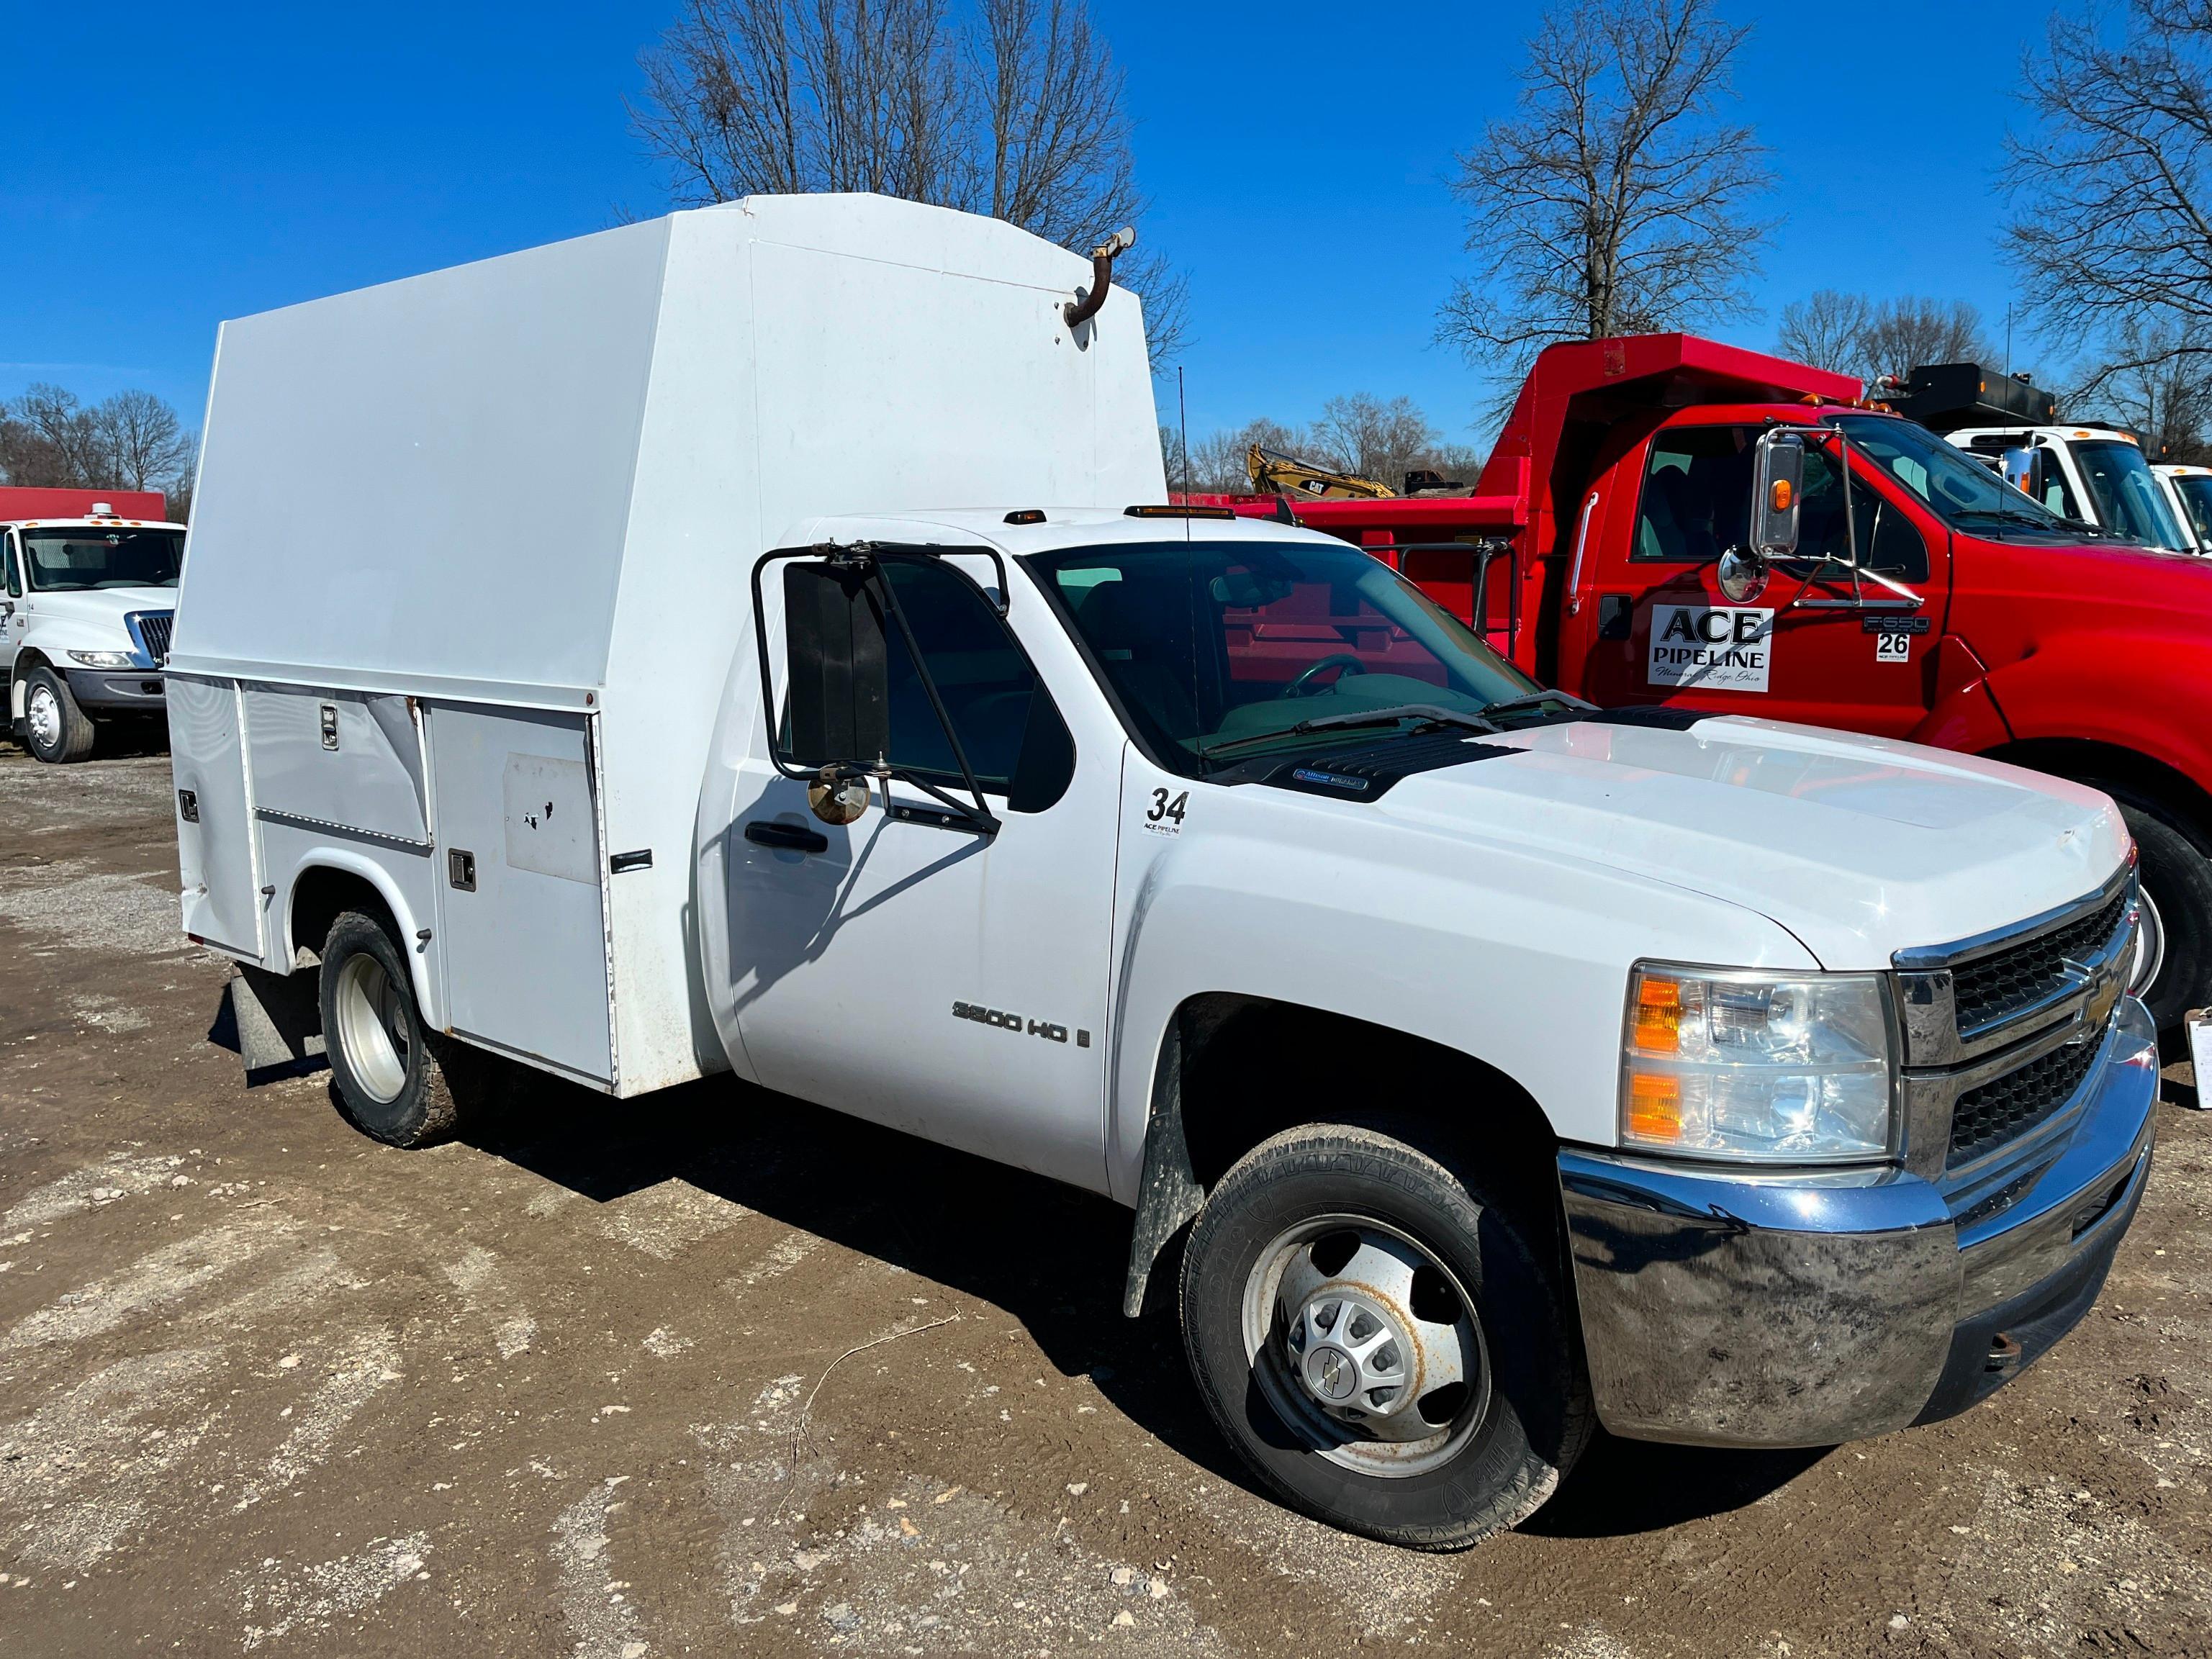 2008 CHEVY 3500HD SERVICE TRUCK VN:1GBJC34628E108358 powered by Duramax diesel engine, equipped with